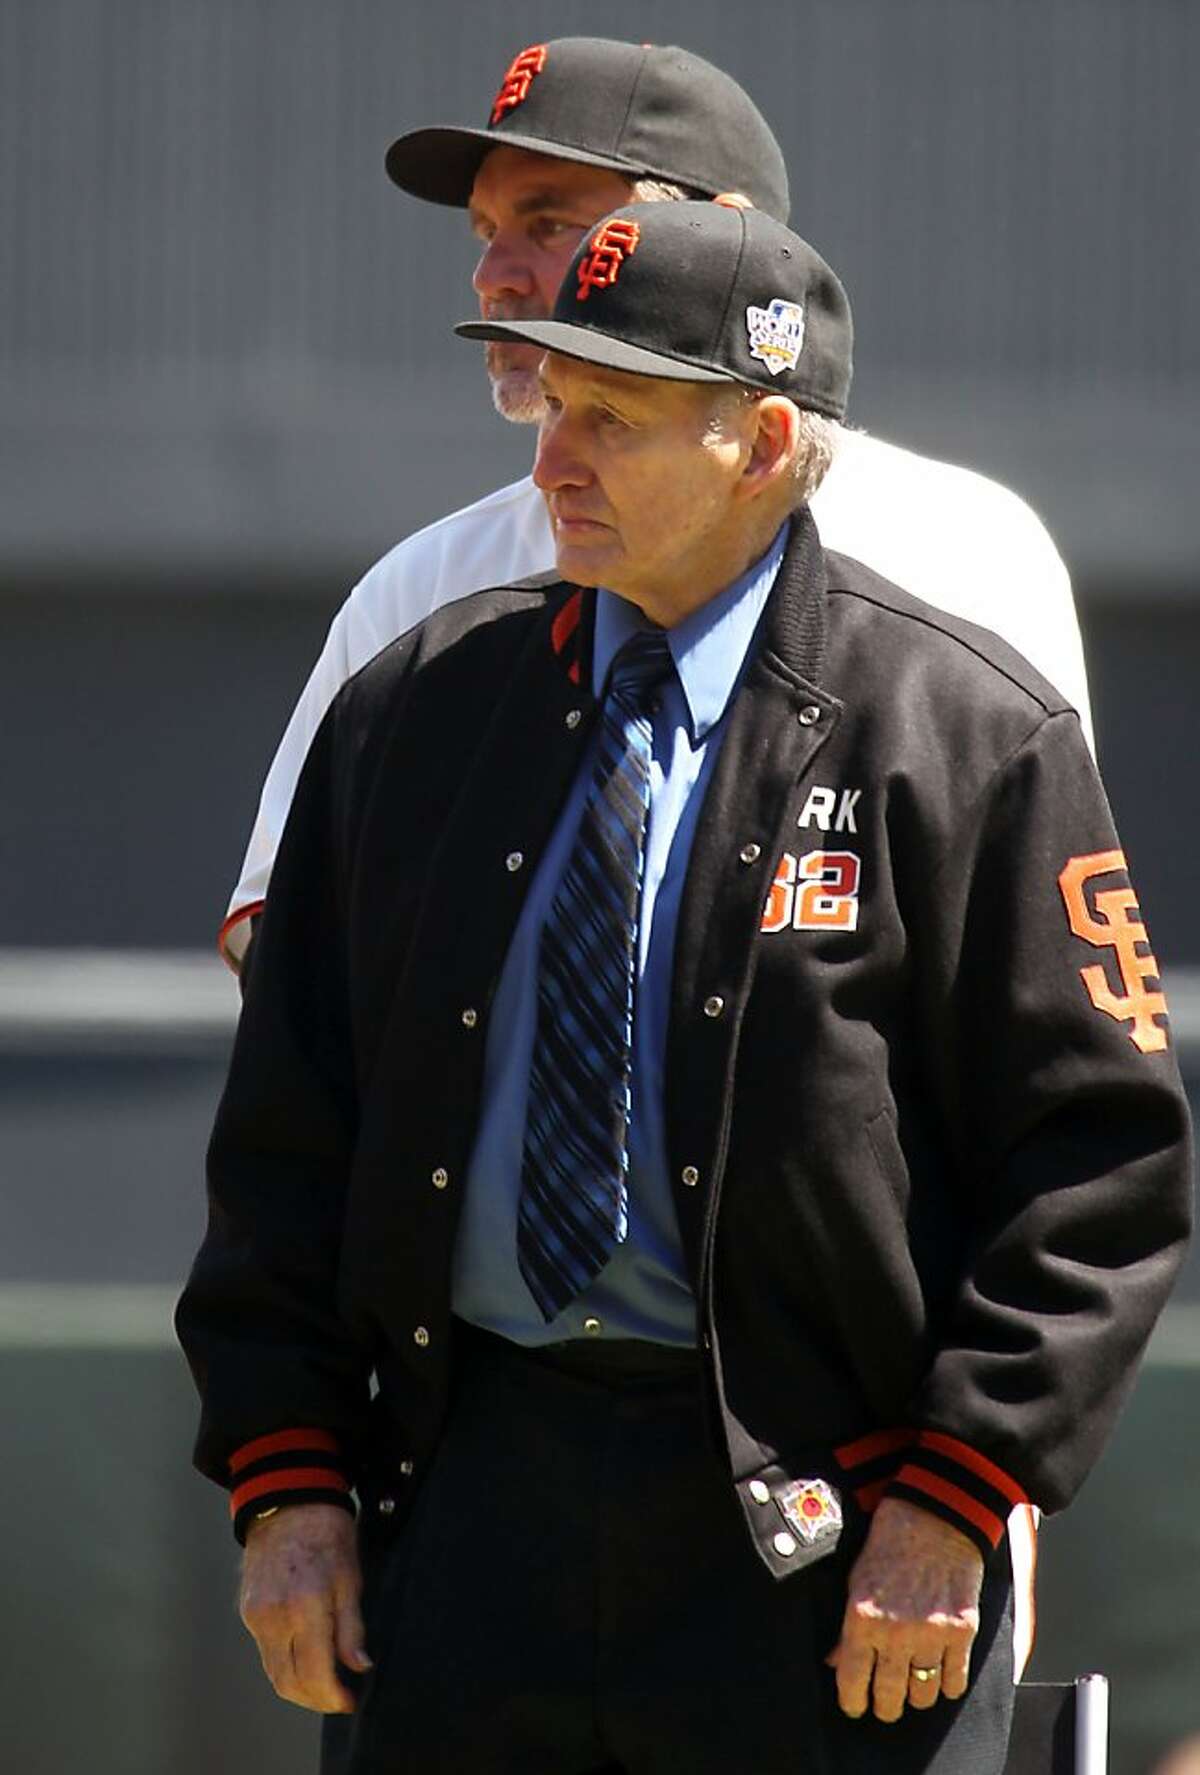 San Francisco Giants Manager Bruce Bochy, rear, stands with former New York Giants manager Alvin Dark, who led the 1961-63 team when they won the pennant. Members of that team were honored Friday April 13, 2012, prior to the start of the Giants and Pittsburgh Pirates game on opening Day in San Francisco. Giants won 5-0.